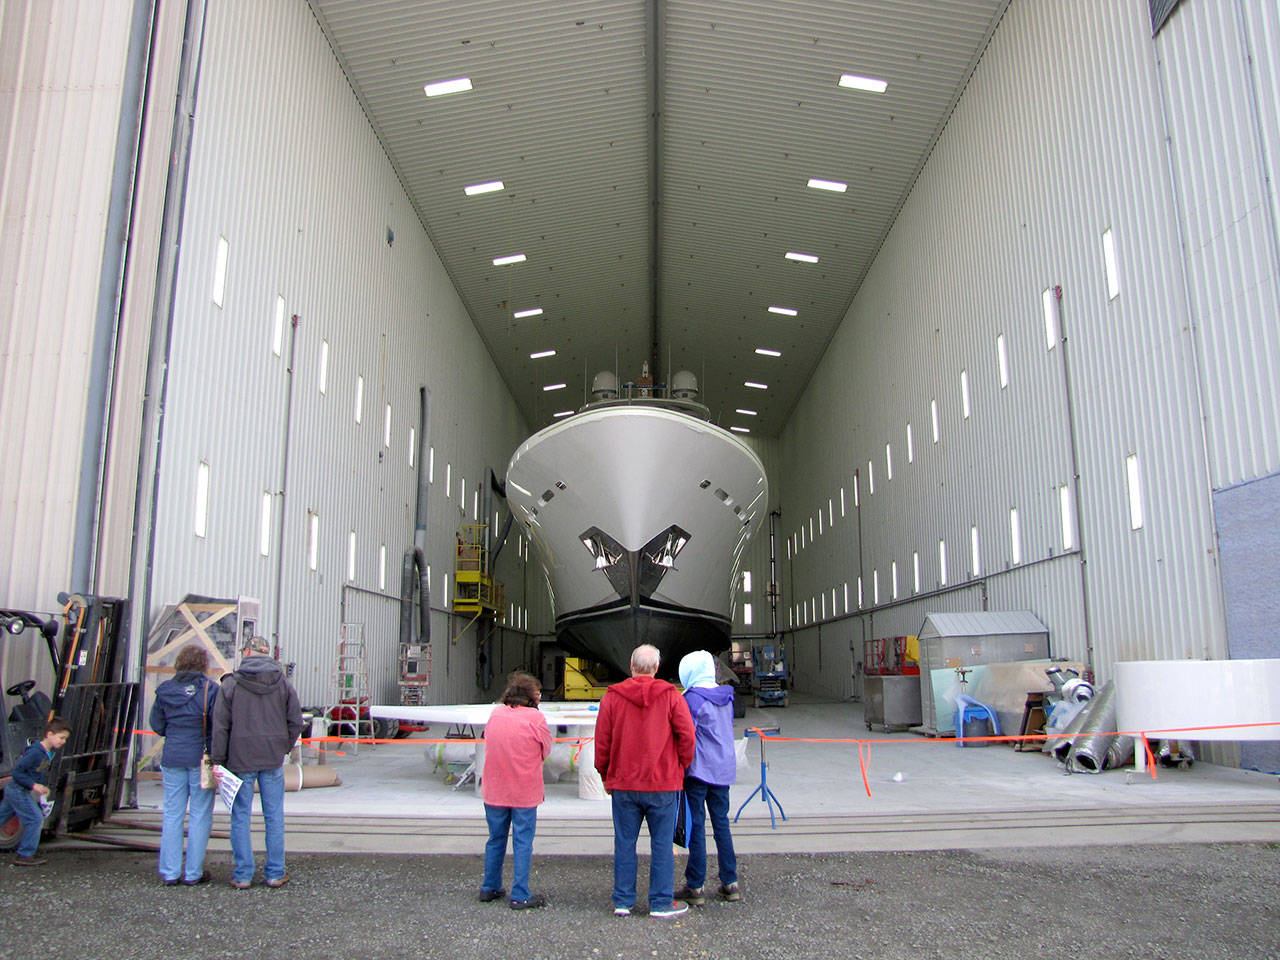 A tour group gazes up at a yacht under repair in the massive Westport Yachts repair bay, which was opened for visitor viewing during the Port of Port Angeles’ inaugural Waterfront Days last year. (Peninsula Daily News)